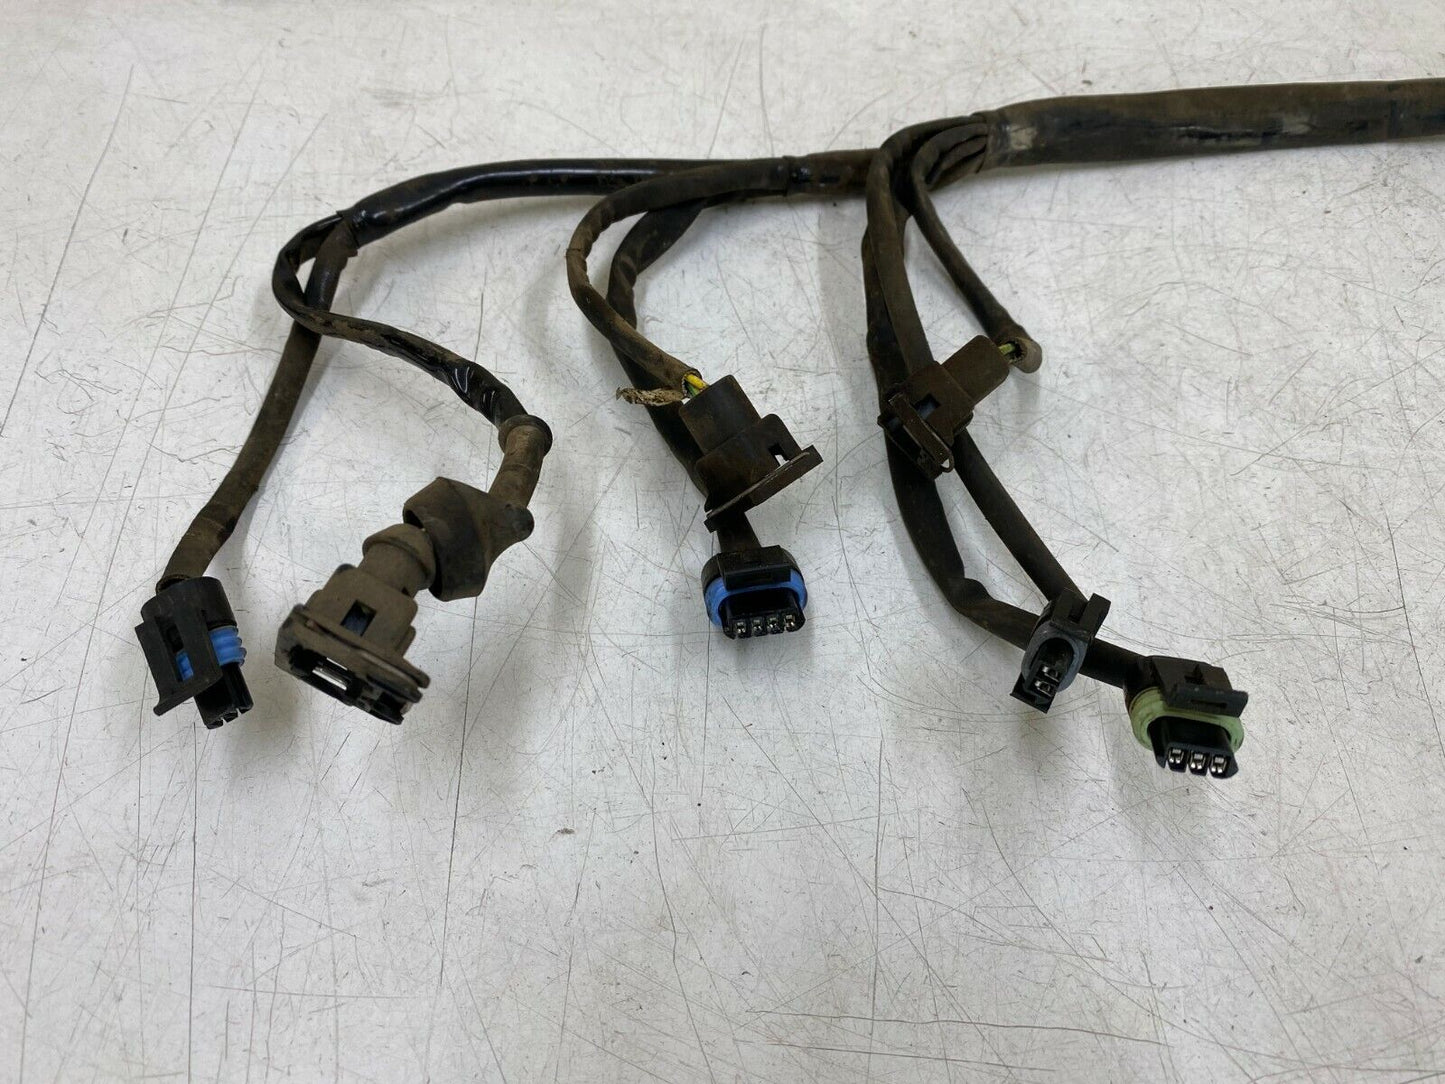 1996 HARLEY ELECTRA GLIDE Touring FLH Fuel Injection Wiring Harness Loom